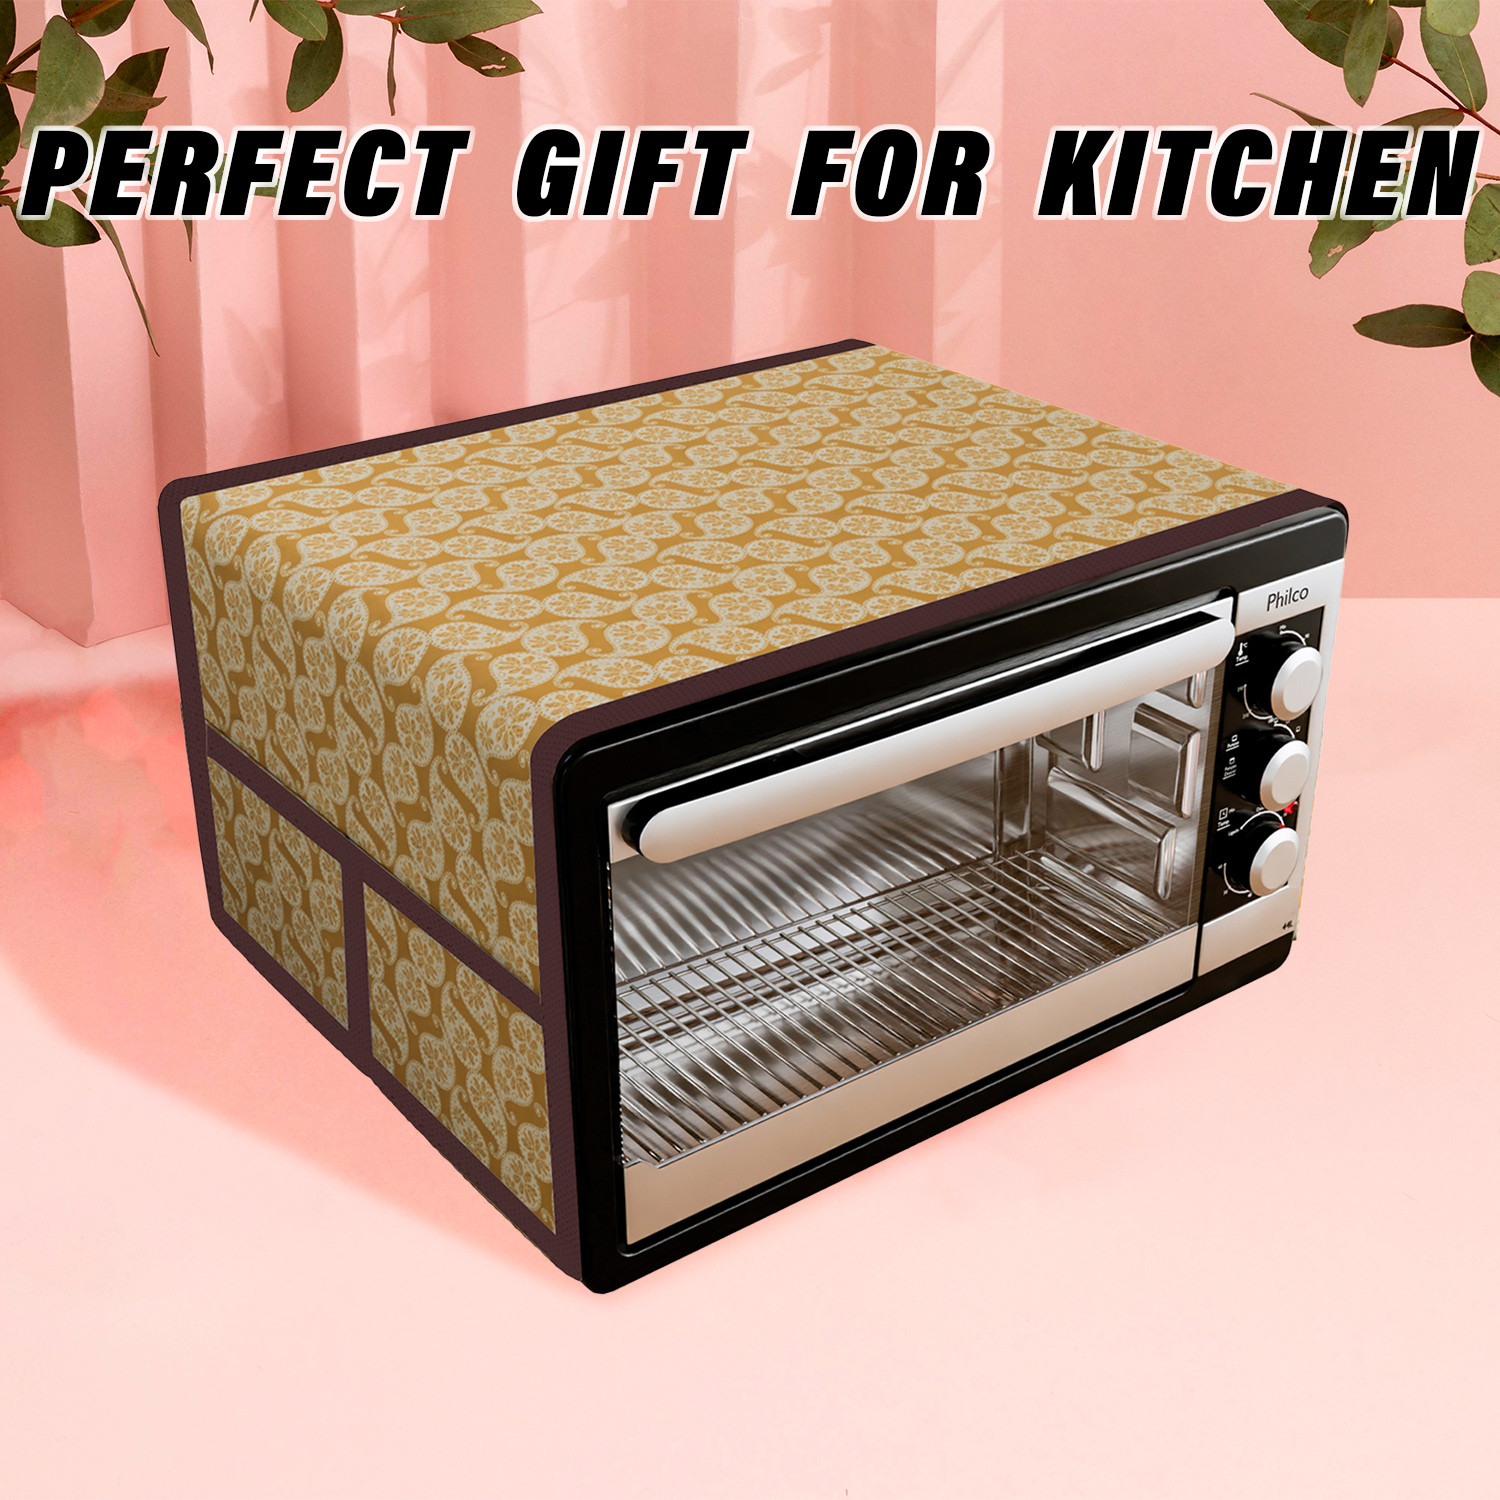 Kuber Industries Oven Top Cover | Microwave Oven Top Cover | Microwave Cover with 4 Utility Pockets | Oven Cover for Kitchen Décor | Carry Design Oven Top Cover | 50 LTR | Golden